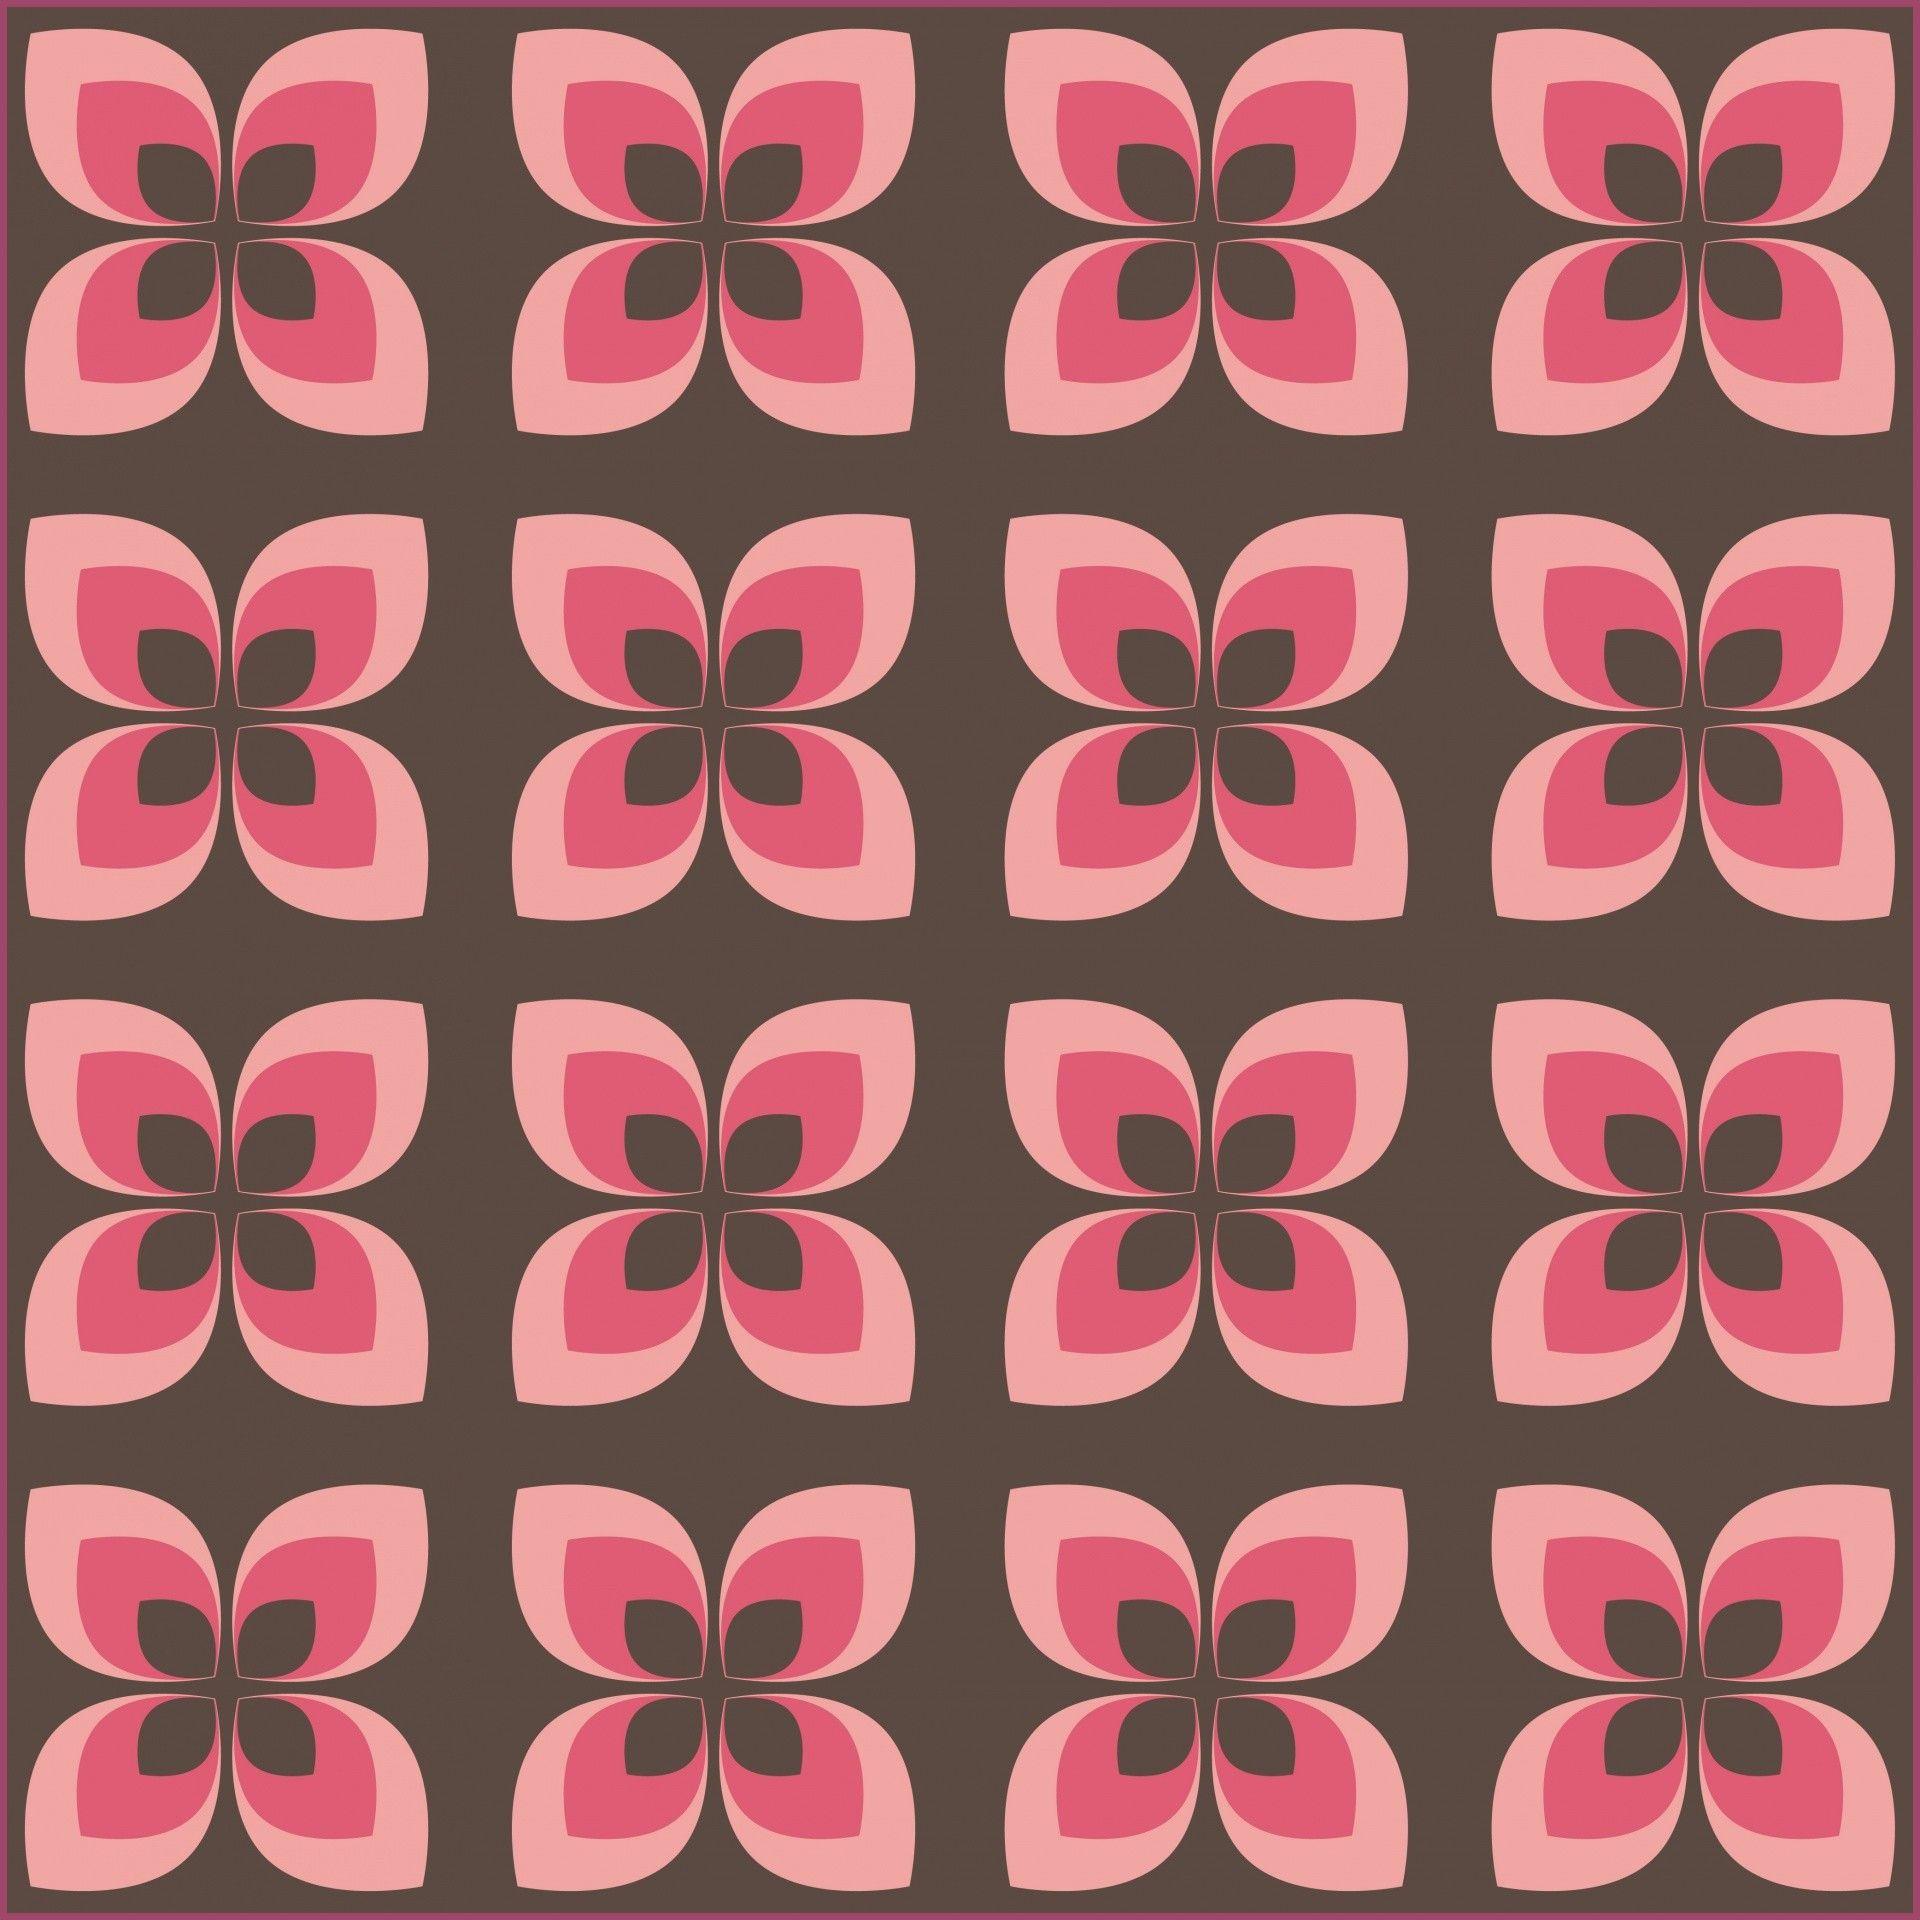 1920x1920 Pink 70s Wallpaper 25022 Retro Wallpaper by the Yard 70s